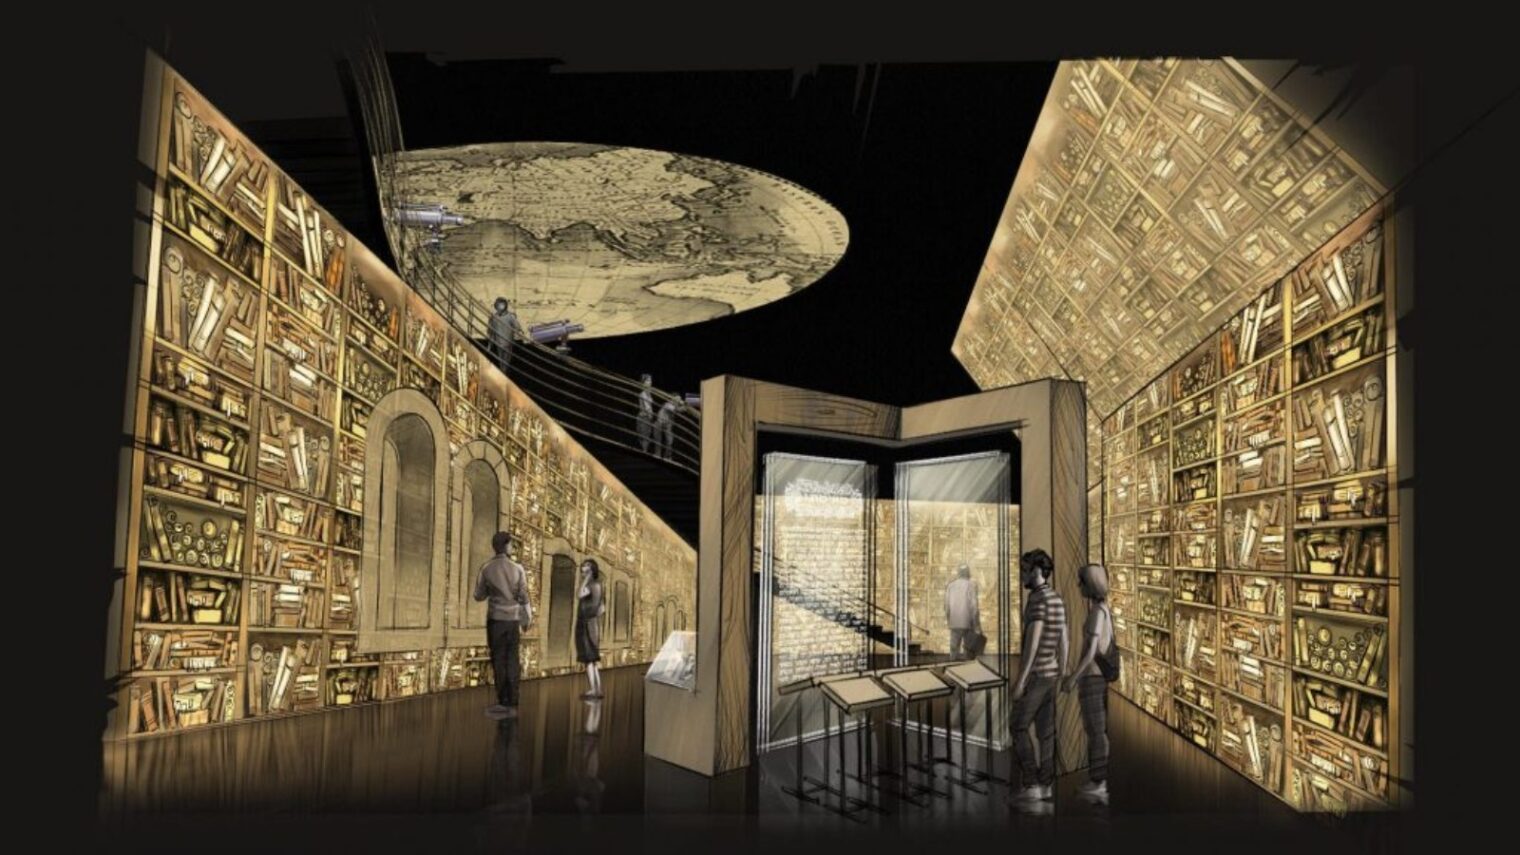 Concept for a room in the Beit HaKehillot Jewish heritage museum in Jerusalem. Illustration courtesy of BJA Associates